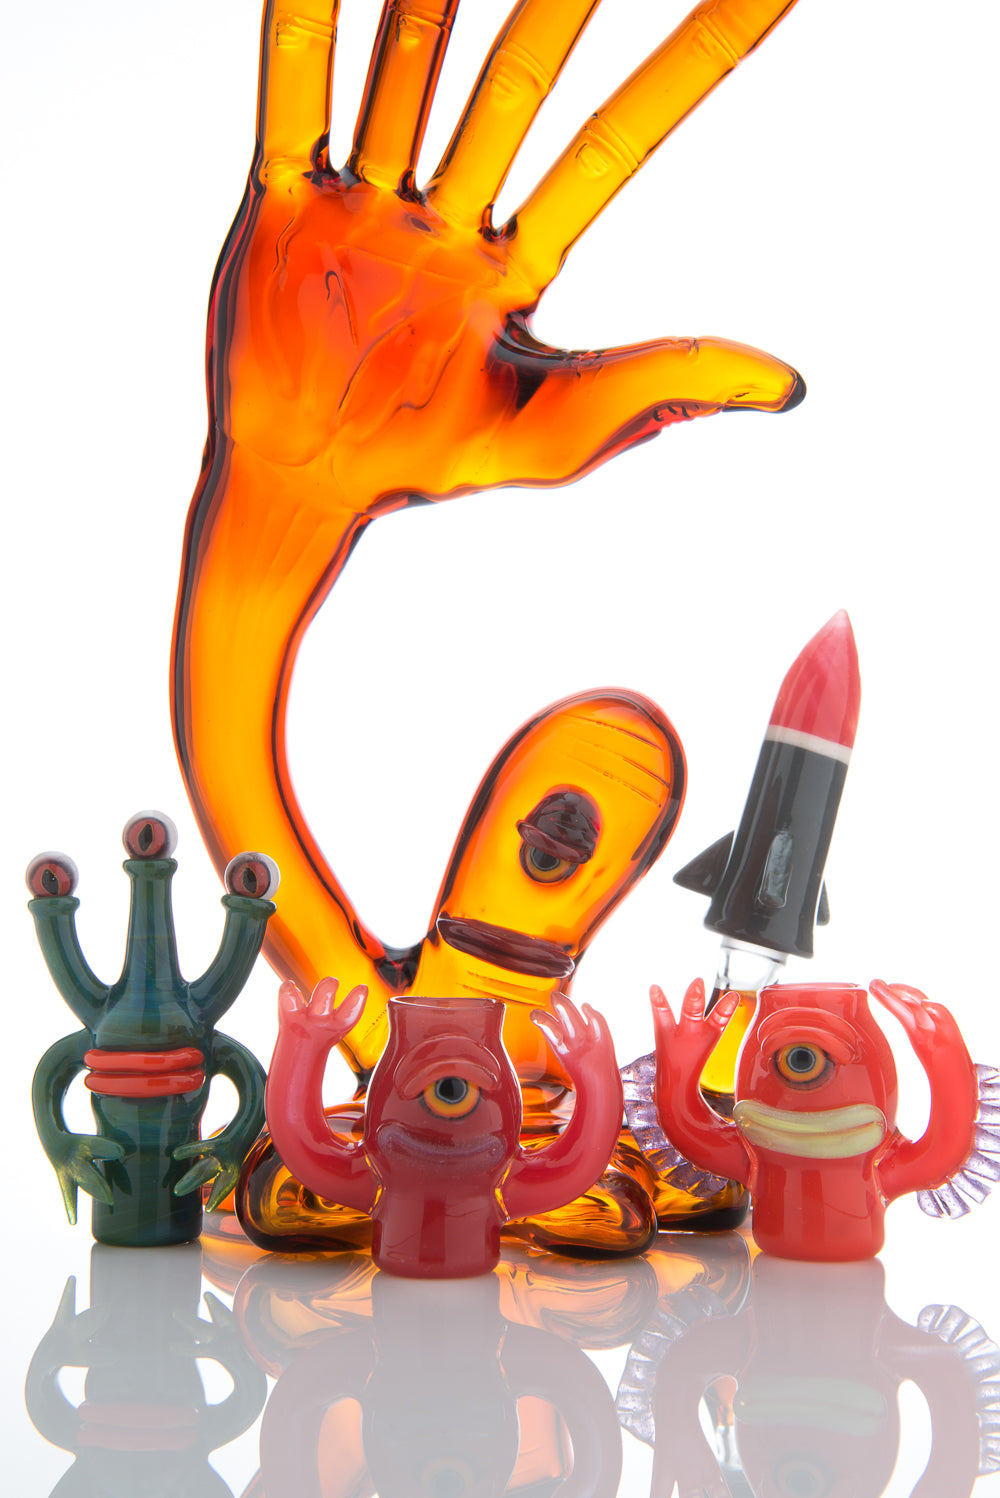 Alien Finger Puppet Hand Vapor Bubbler and Dome Holder Collaboration by Joe Peters, Robert Mickelsen, and Elbo